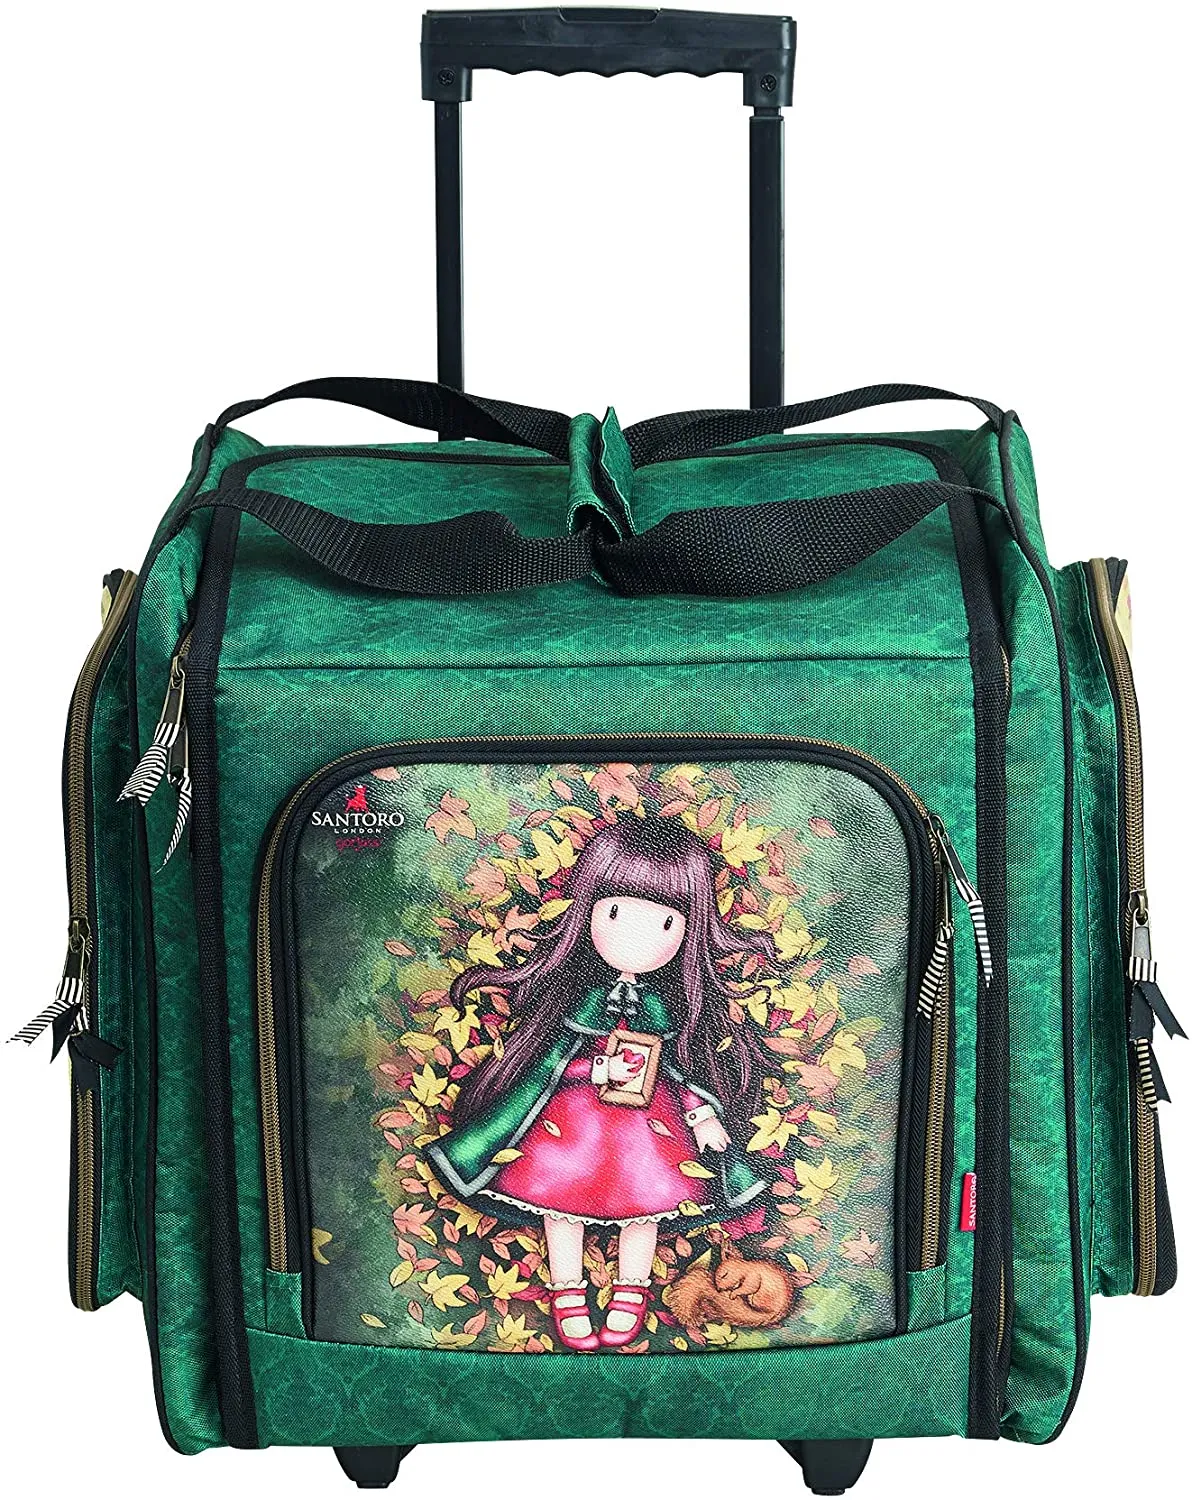 The knitting bag from Santora is made of green fabric with Gorjuss printed on it standing amid fallen leaves